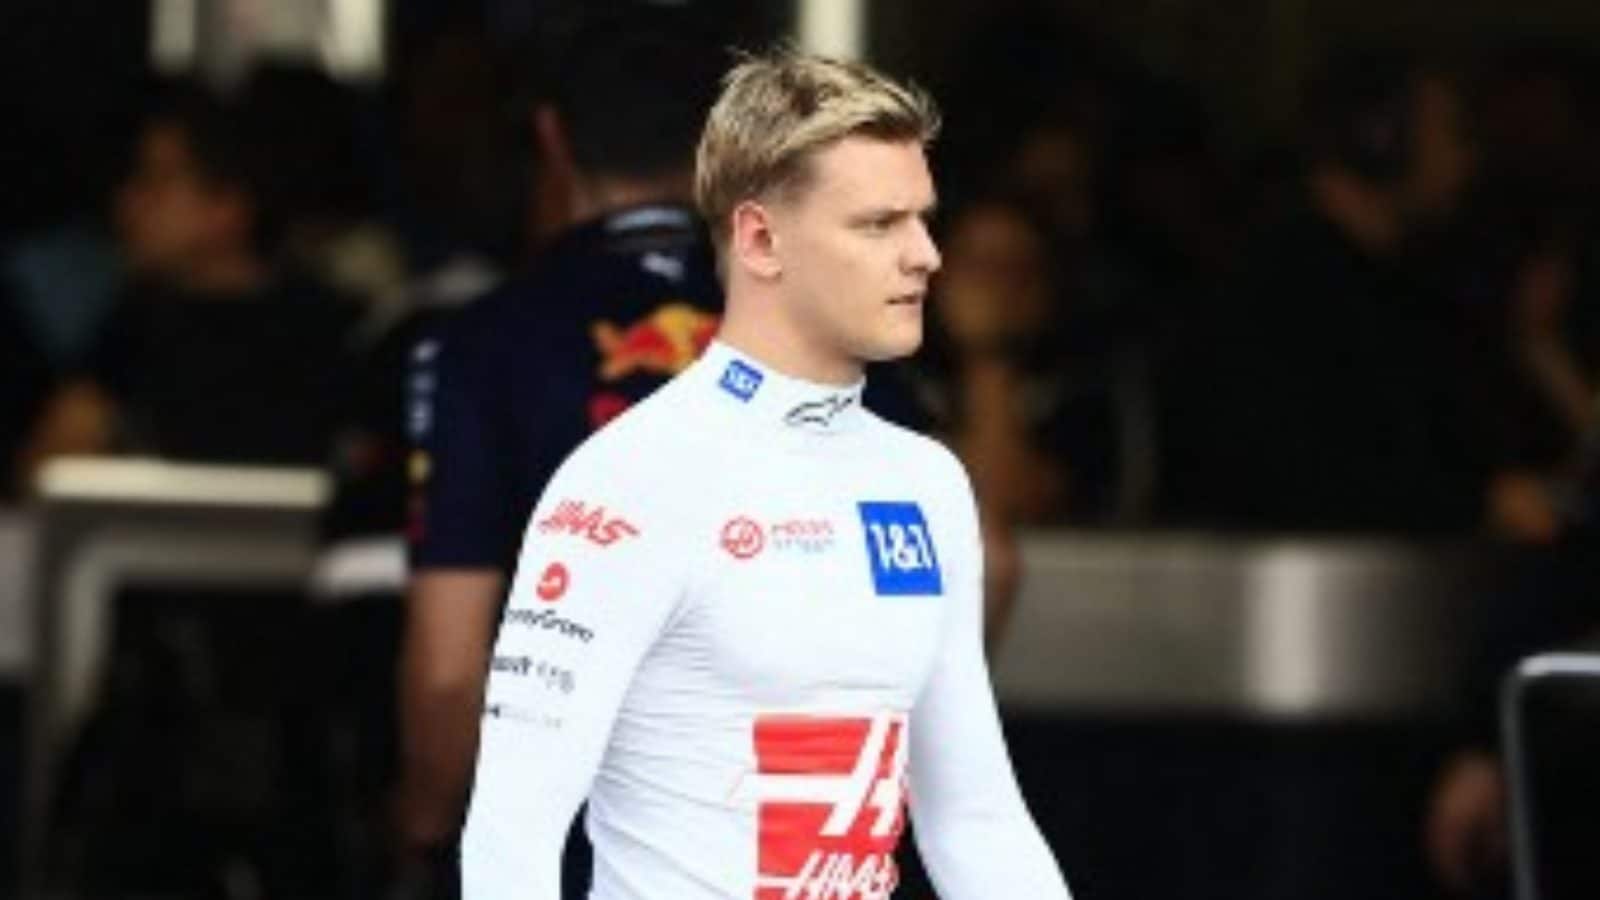 Mick Schumacher Signs as McLaren Reserve Driver in Addition to Similar Role at Mercedes